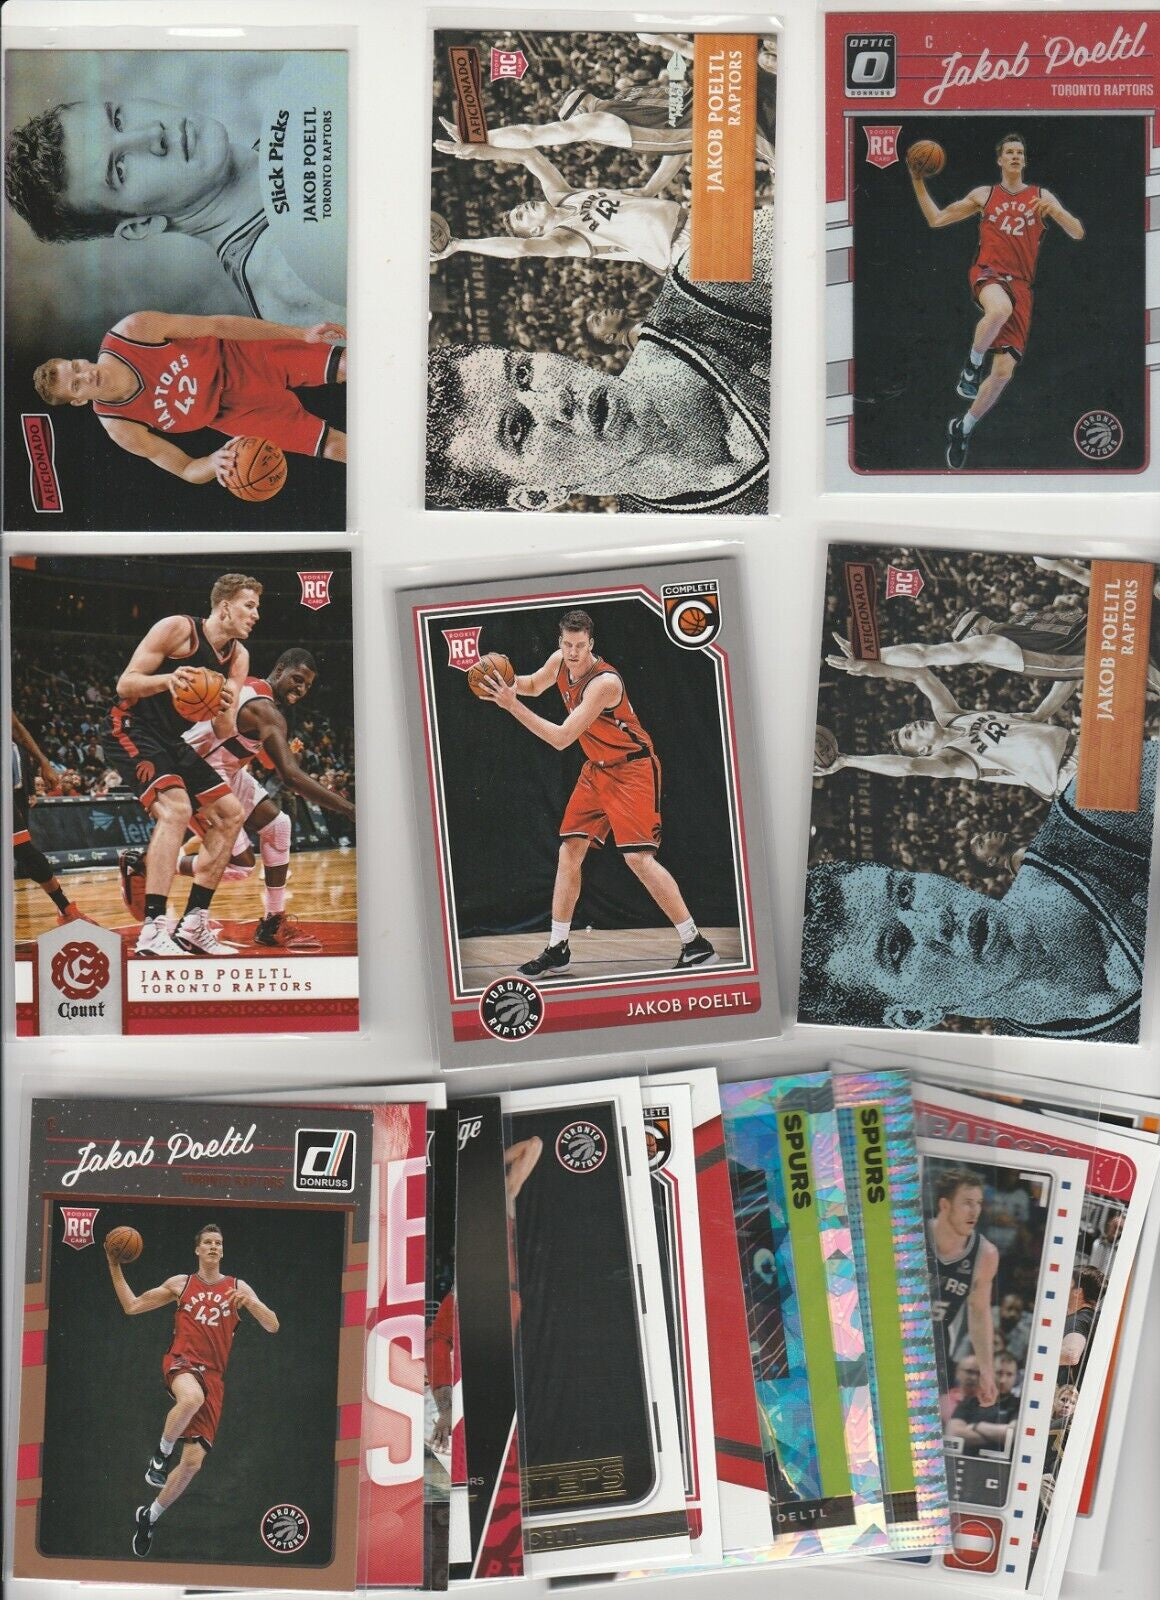 2016-17 Jakob Poeltl - Toronto Raptors - Rookie Card (1x Randomly Selected RC, May Not Be Pictured)